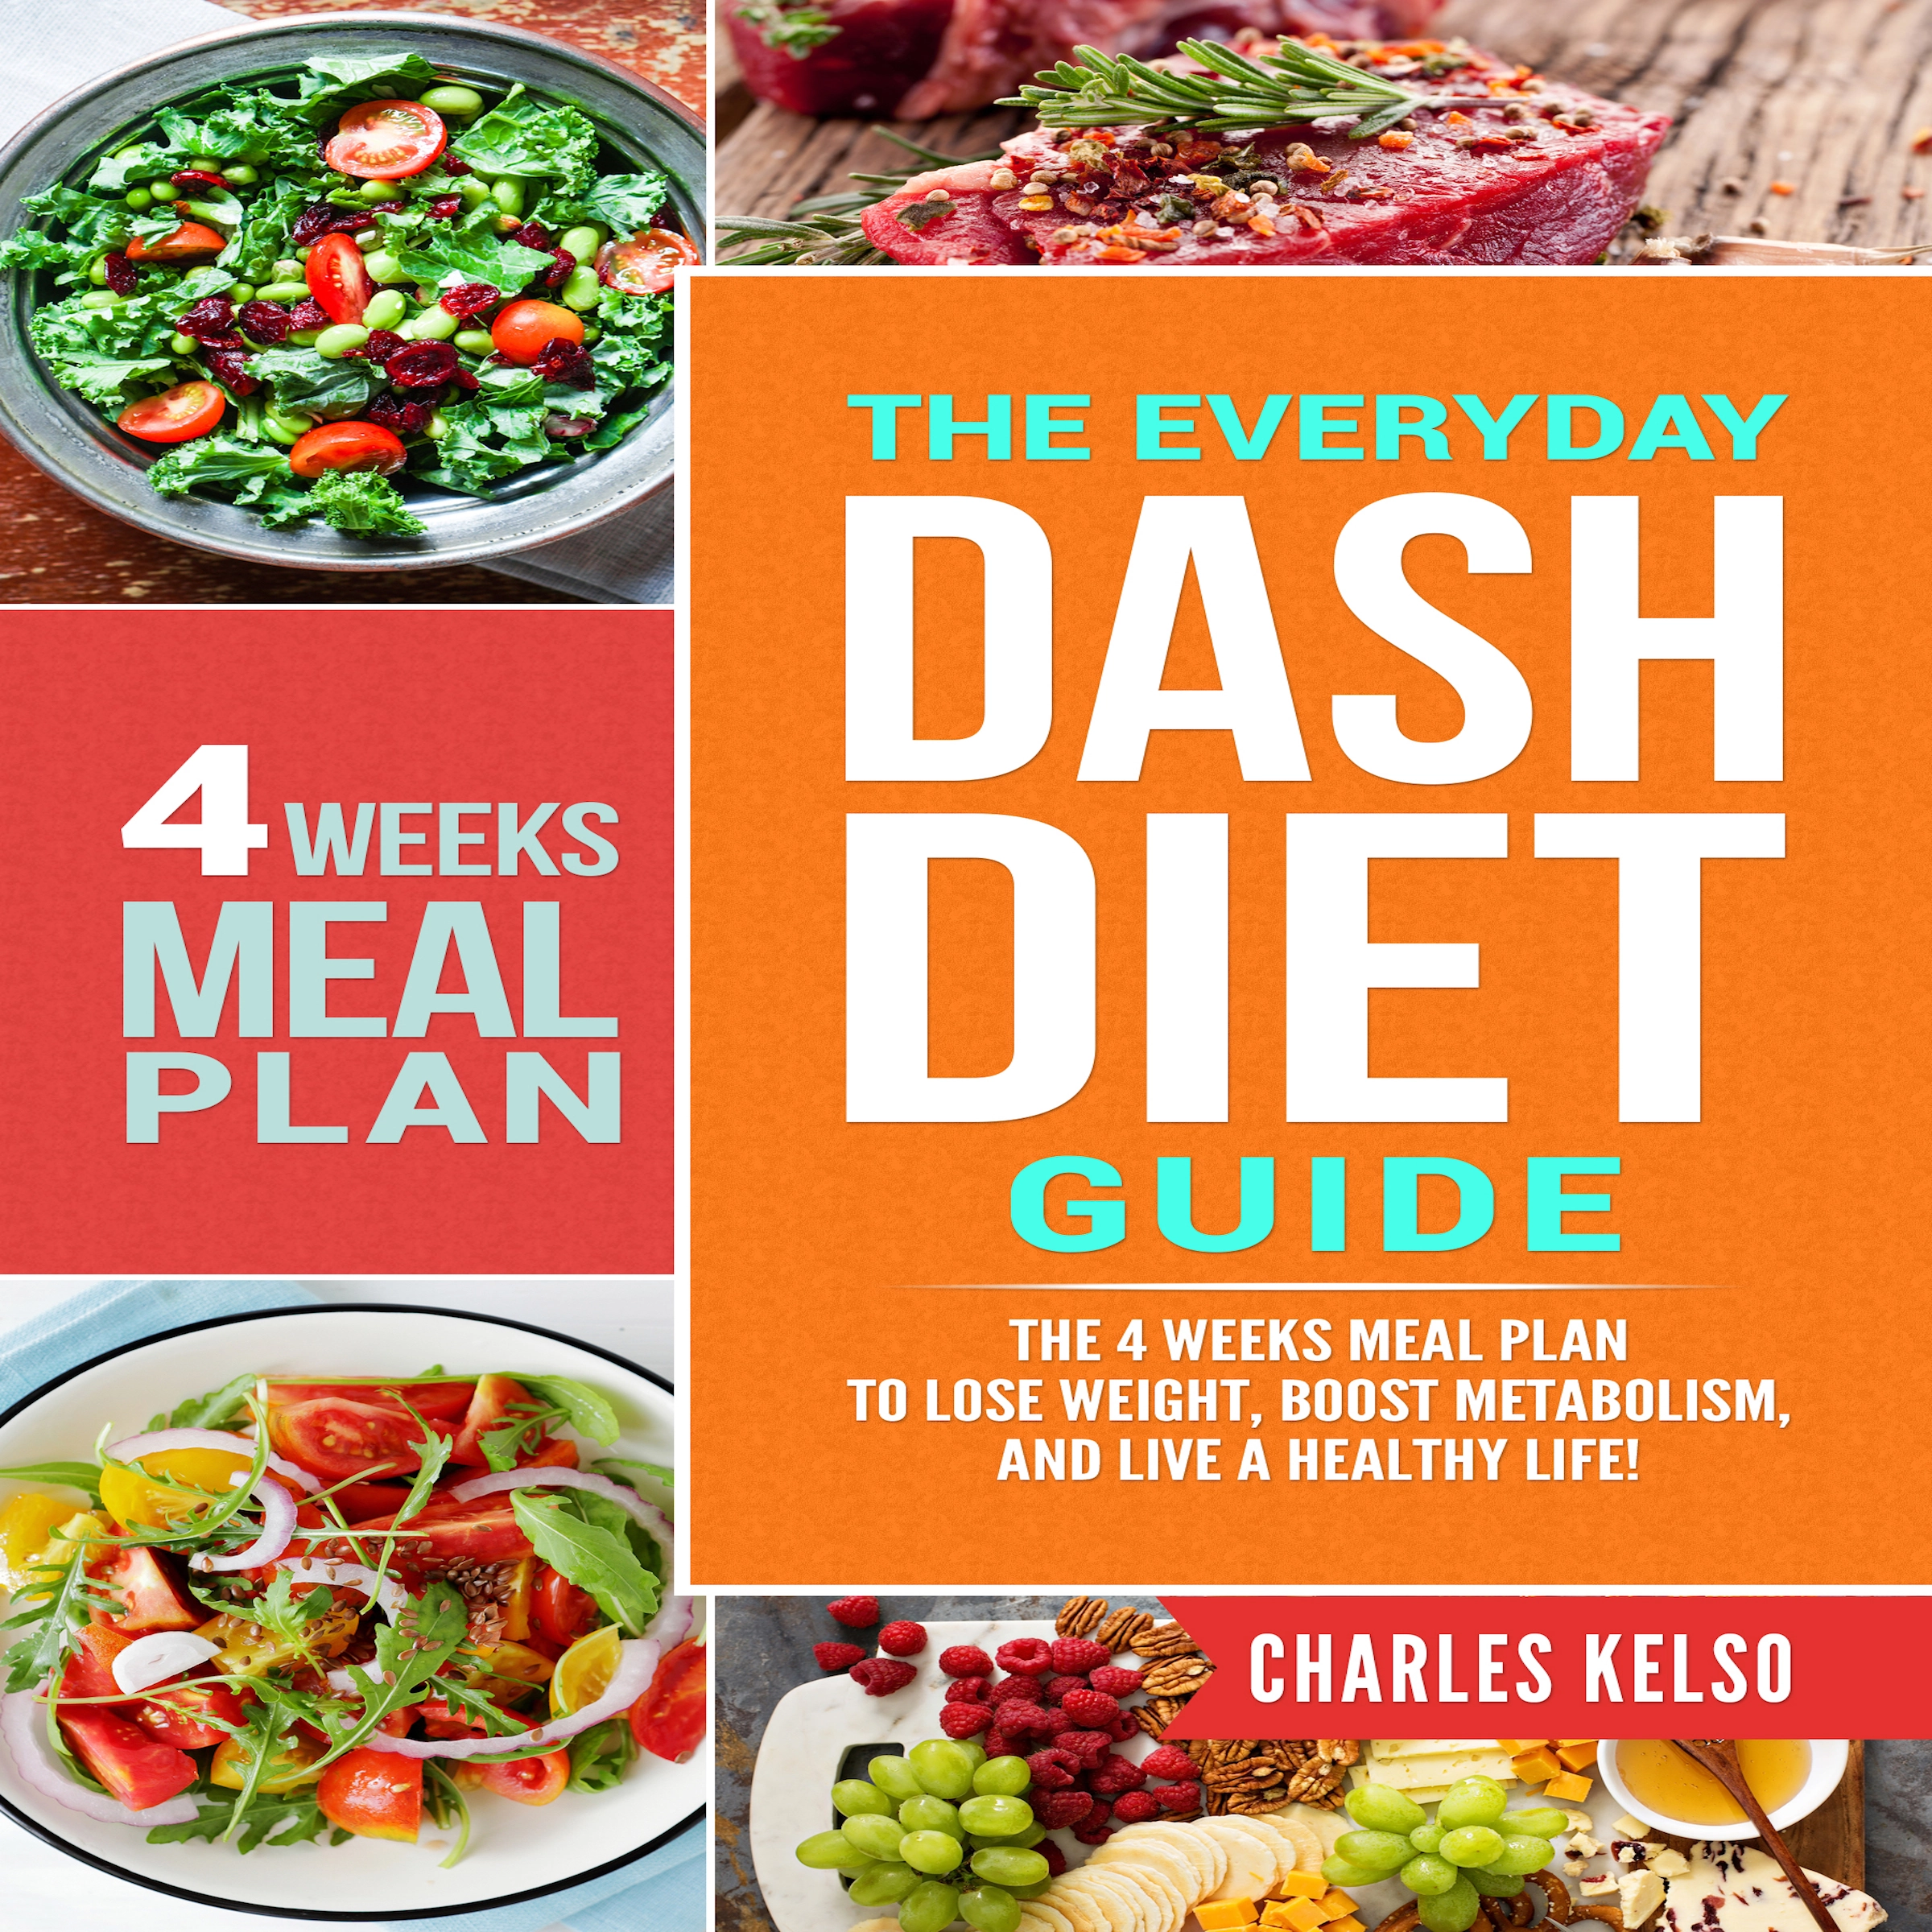 The Everyday DASH Diet Guide: The 4 Weeks Meal Plan to Lose Weight, Boost Metabolism, and Live a Healthy Life Audiobook by Charles Kelso